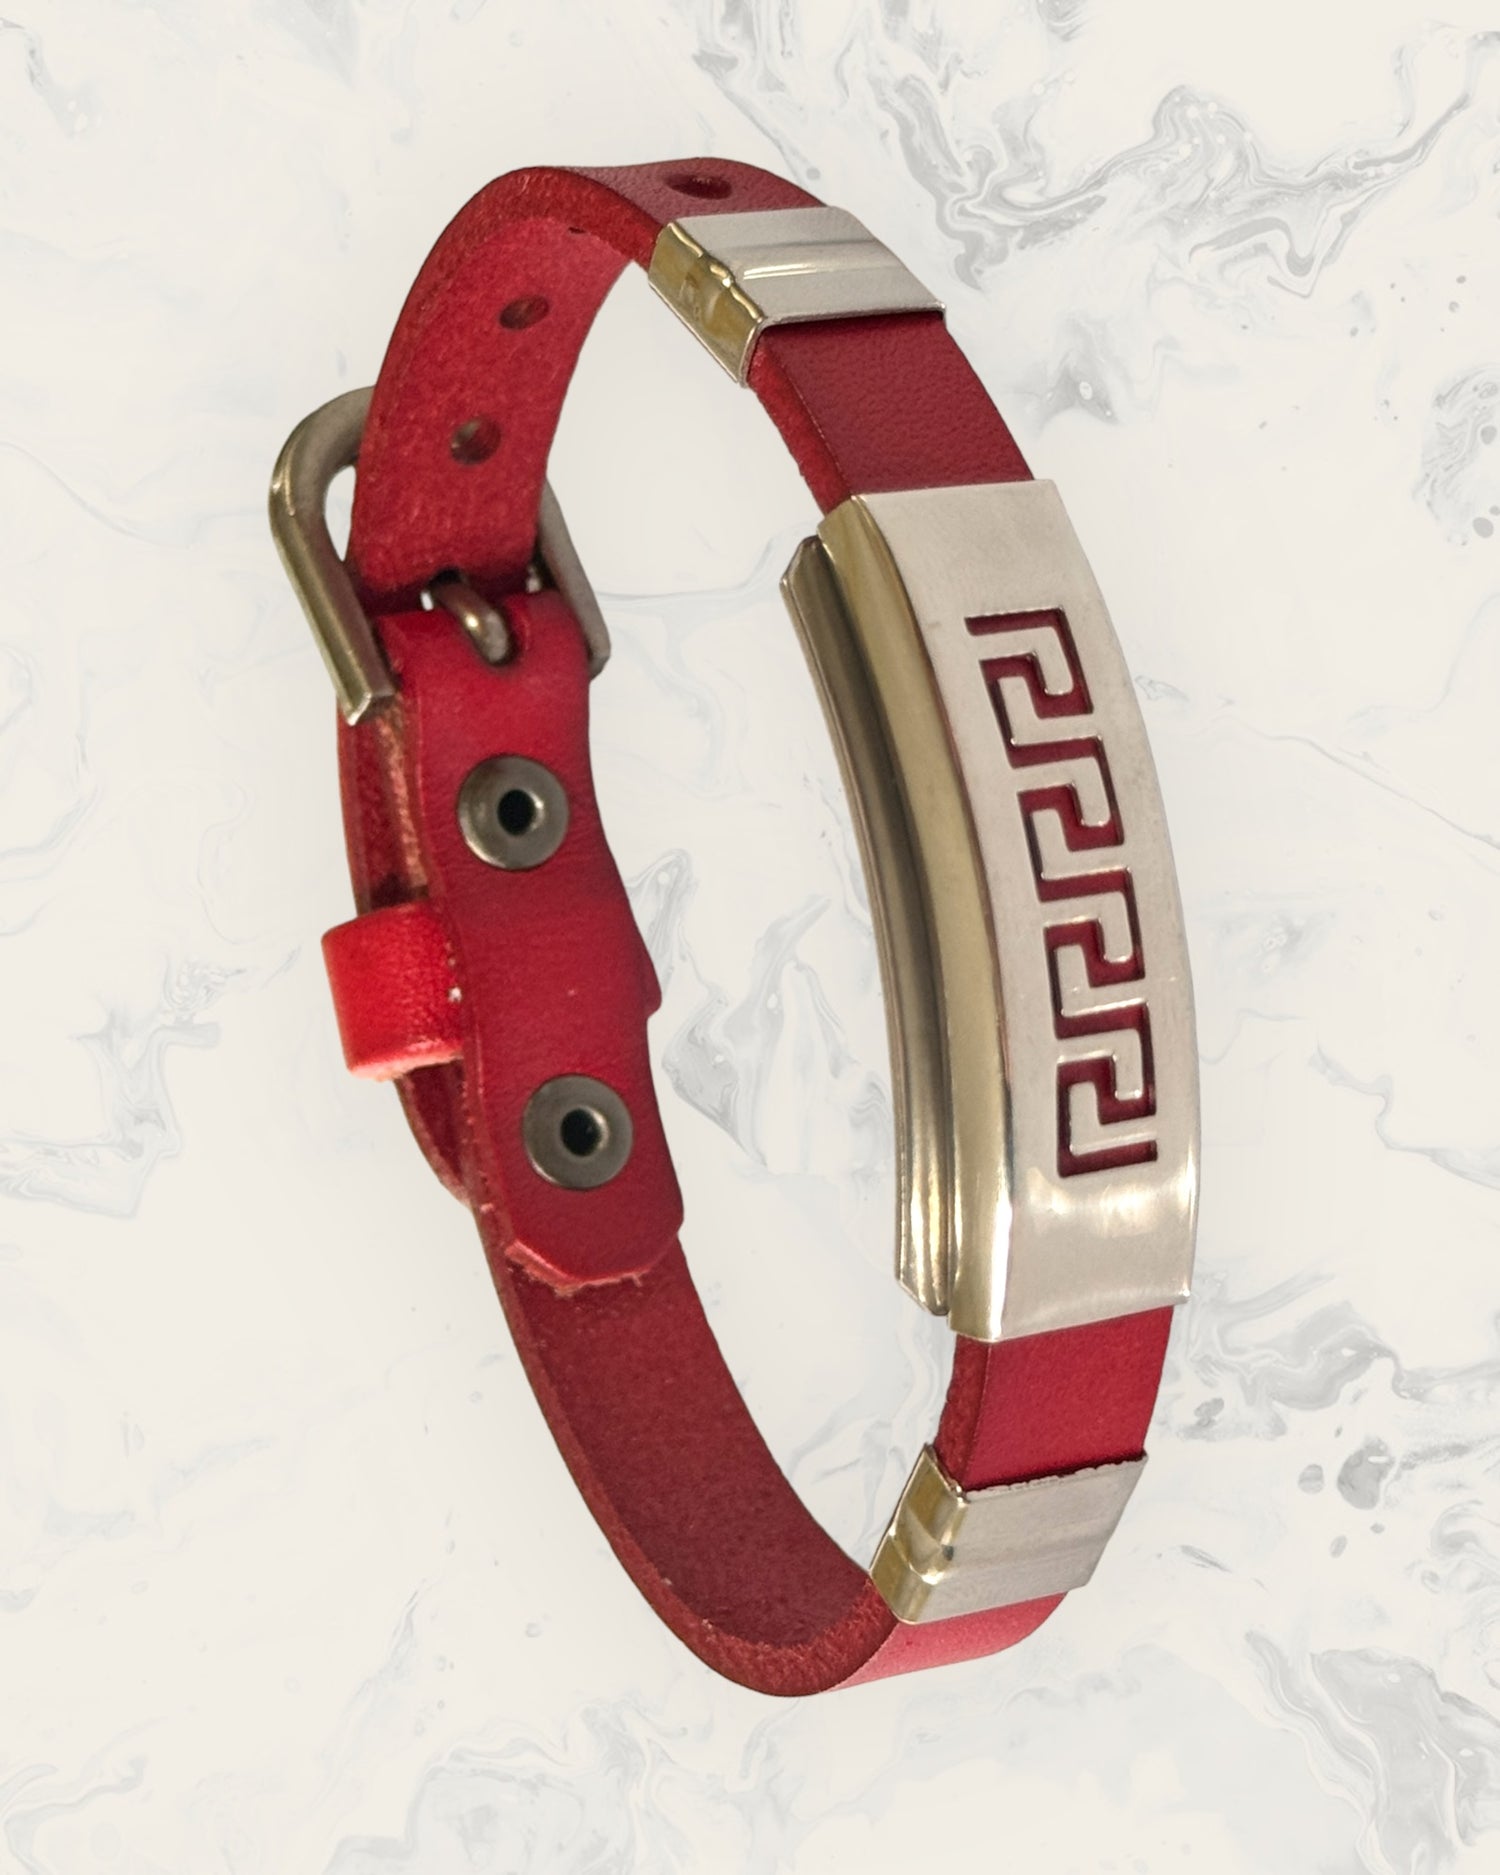 Natural Pain Relief and EMF Protection Bracelet Leather Band Color Red with Greek Key design on a silver metal slider